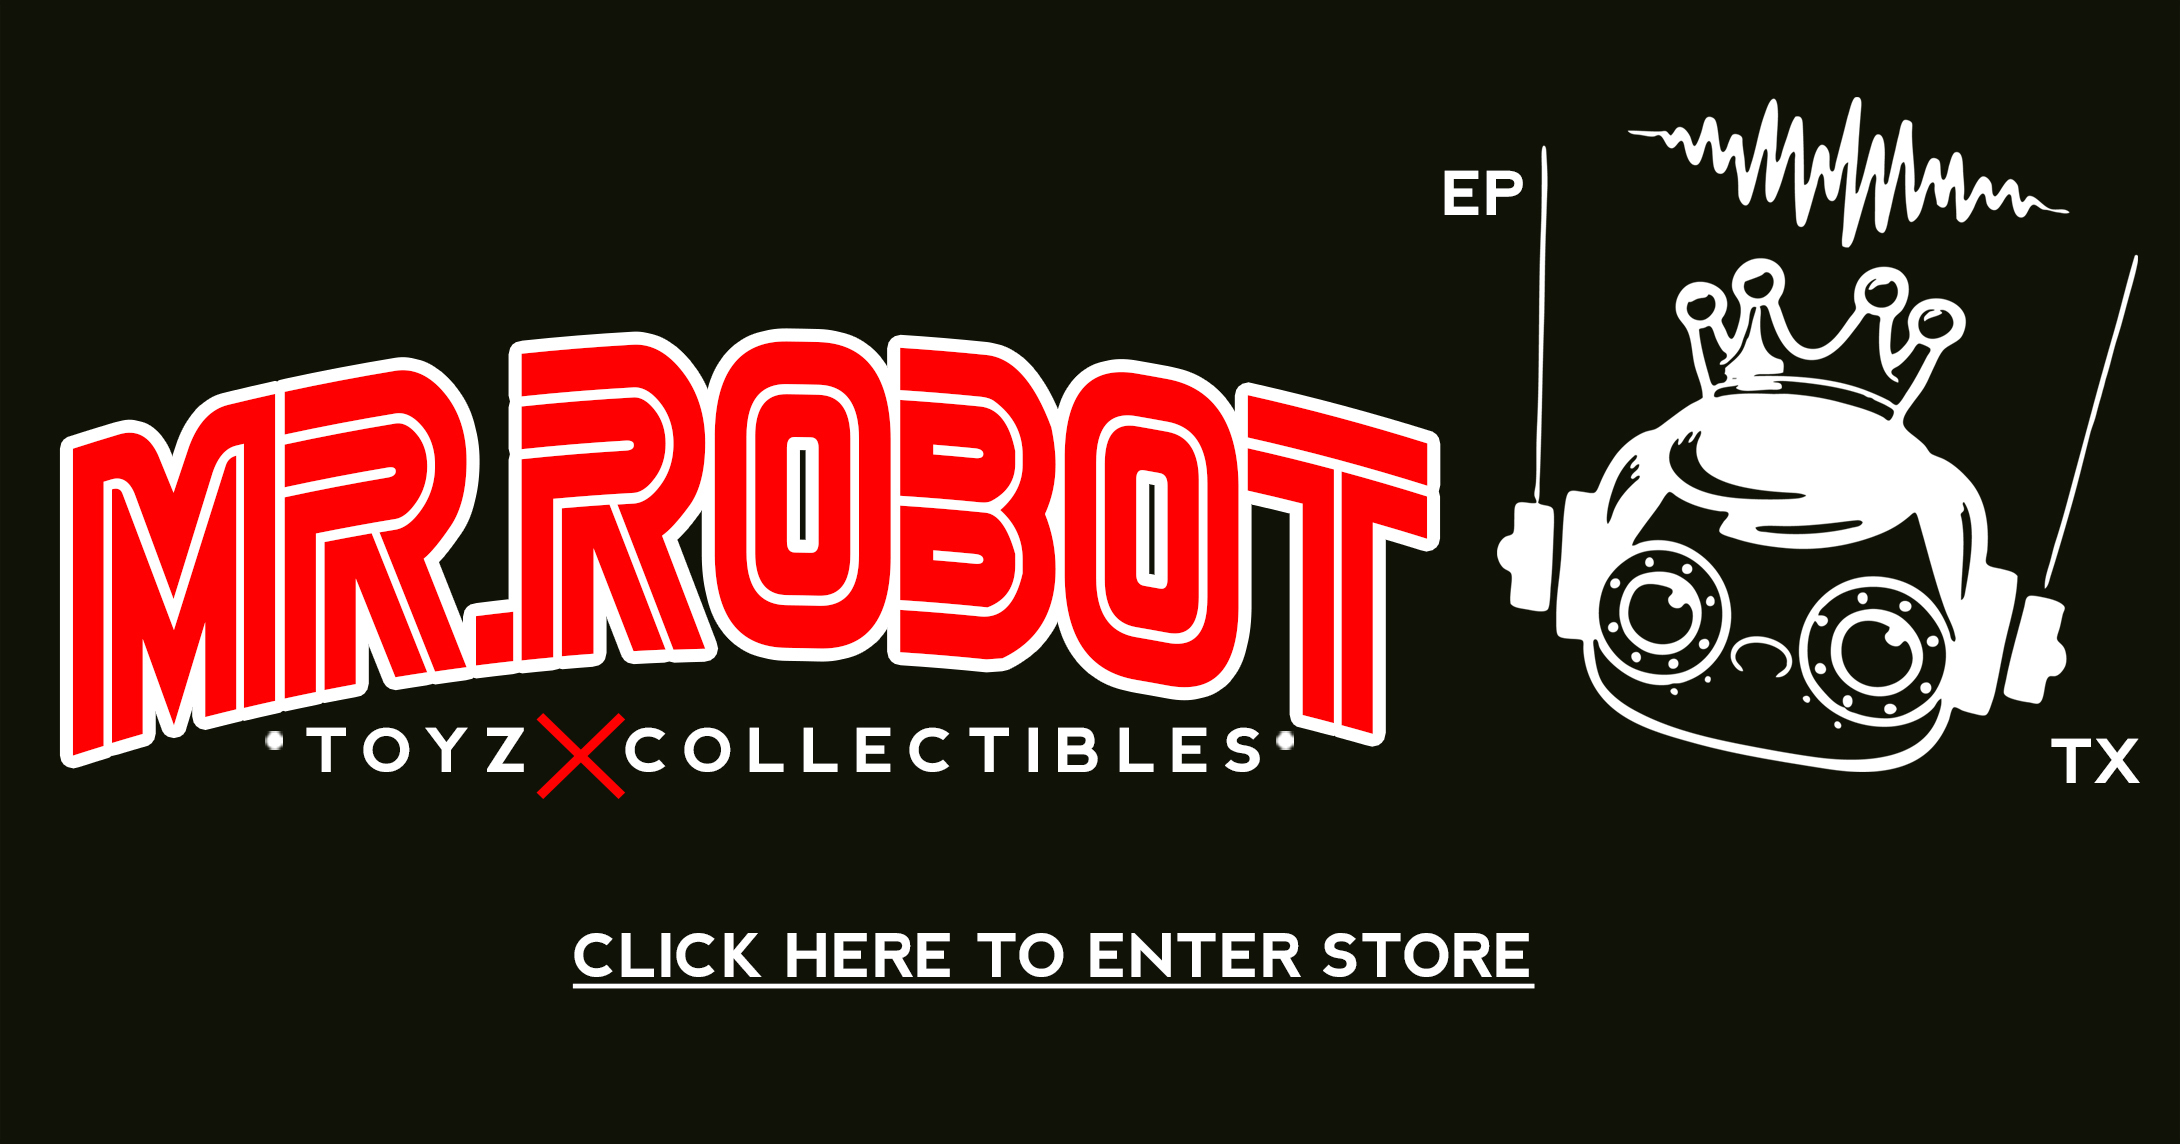 Mr. Robot Toyz and Collectibles